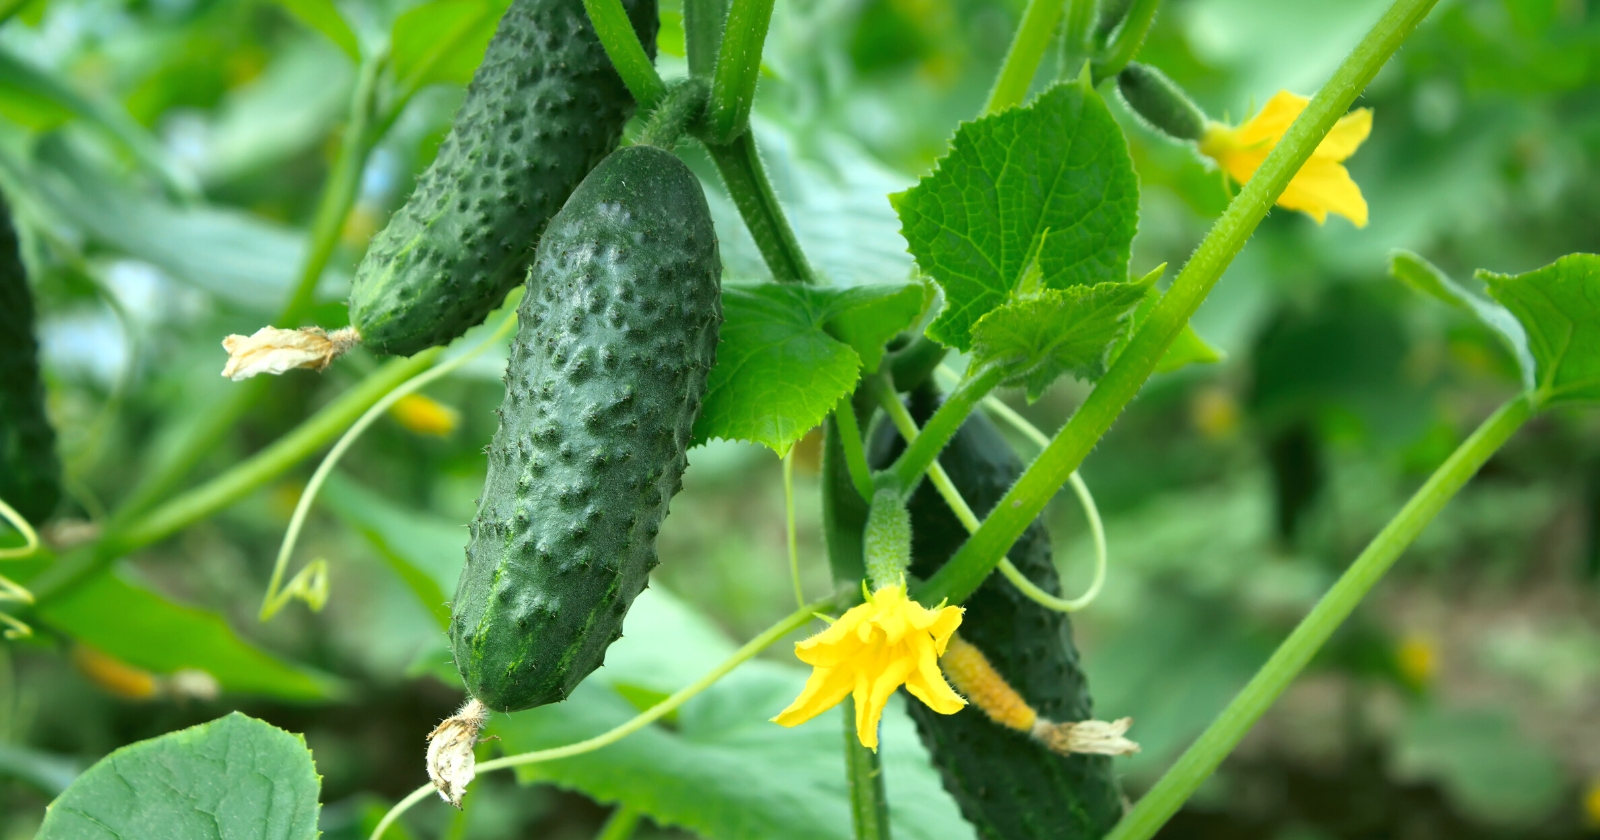 Why Are My Garden Grown Cucumbers So Bitter This Season?